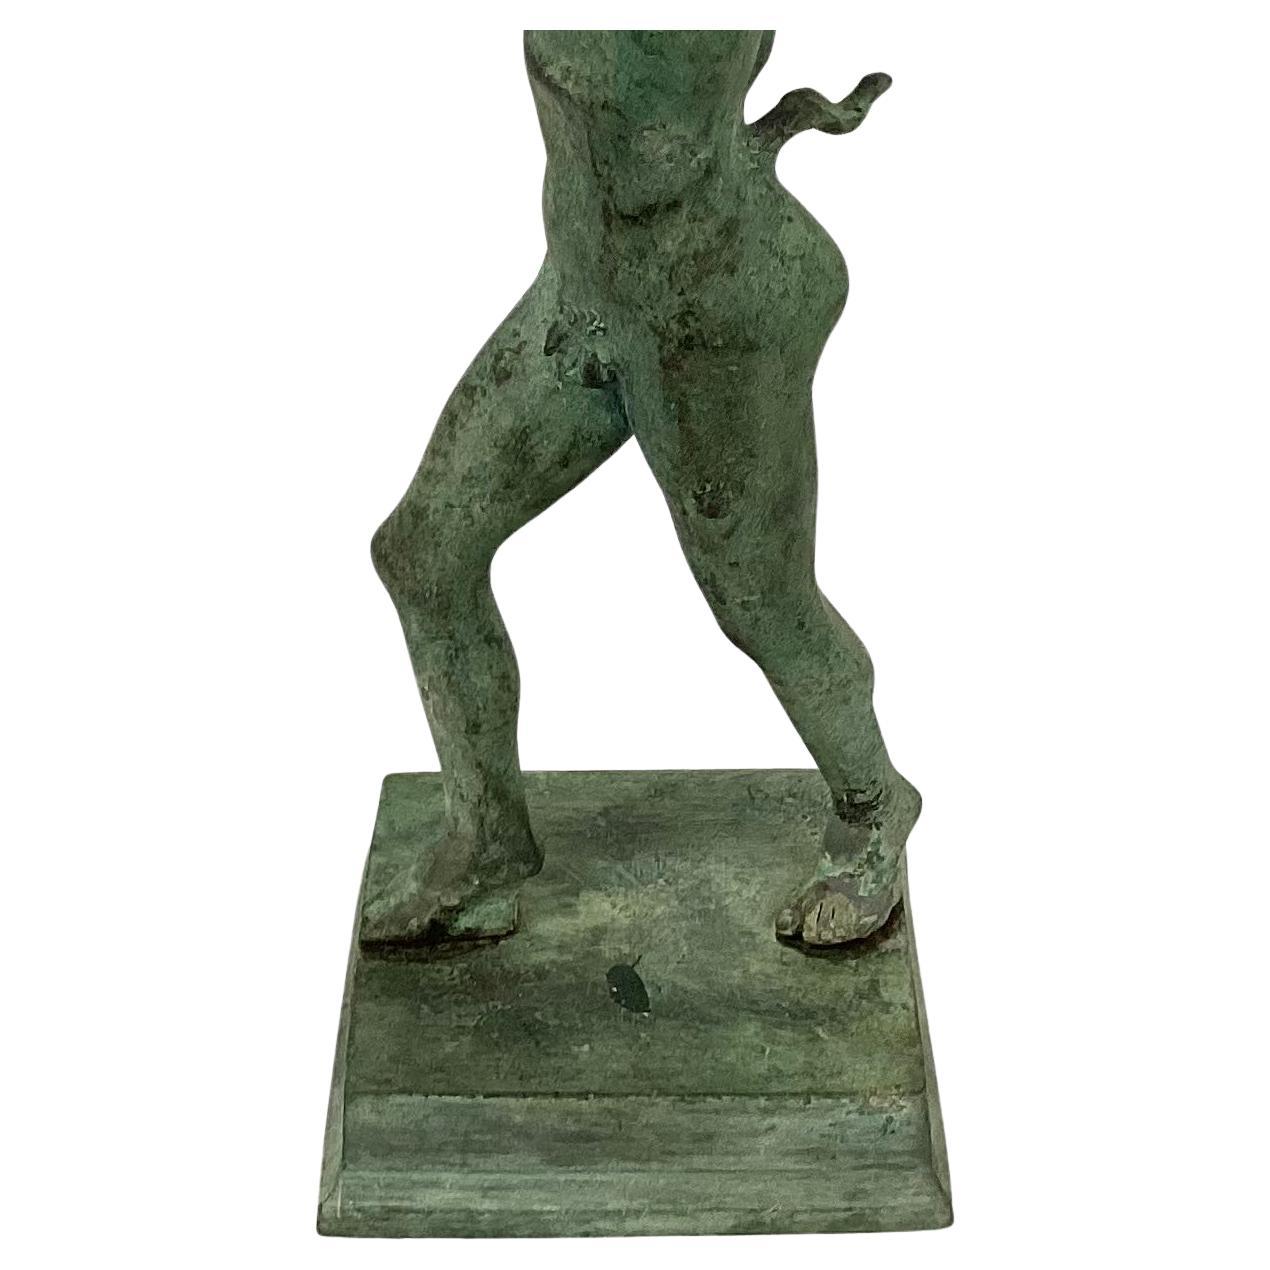 Italian classical bronze sculpture of the Dancing Faun of Pompeii. Fauns were an example of spirits of untamed woodland, often connected to Pan and Greek satyrs by Romans, or followers of the Greek god of wine and agriculture, Dionysus. This joyful